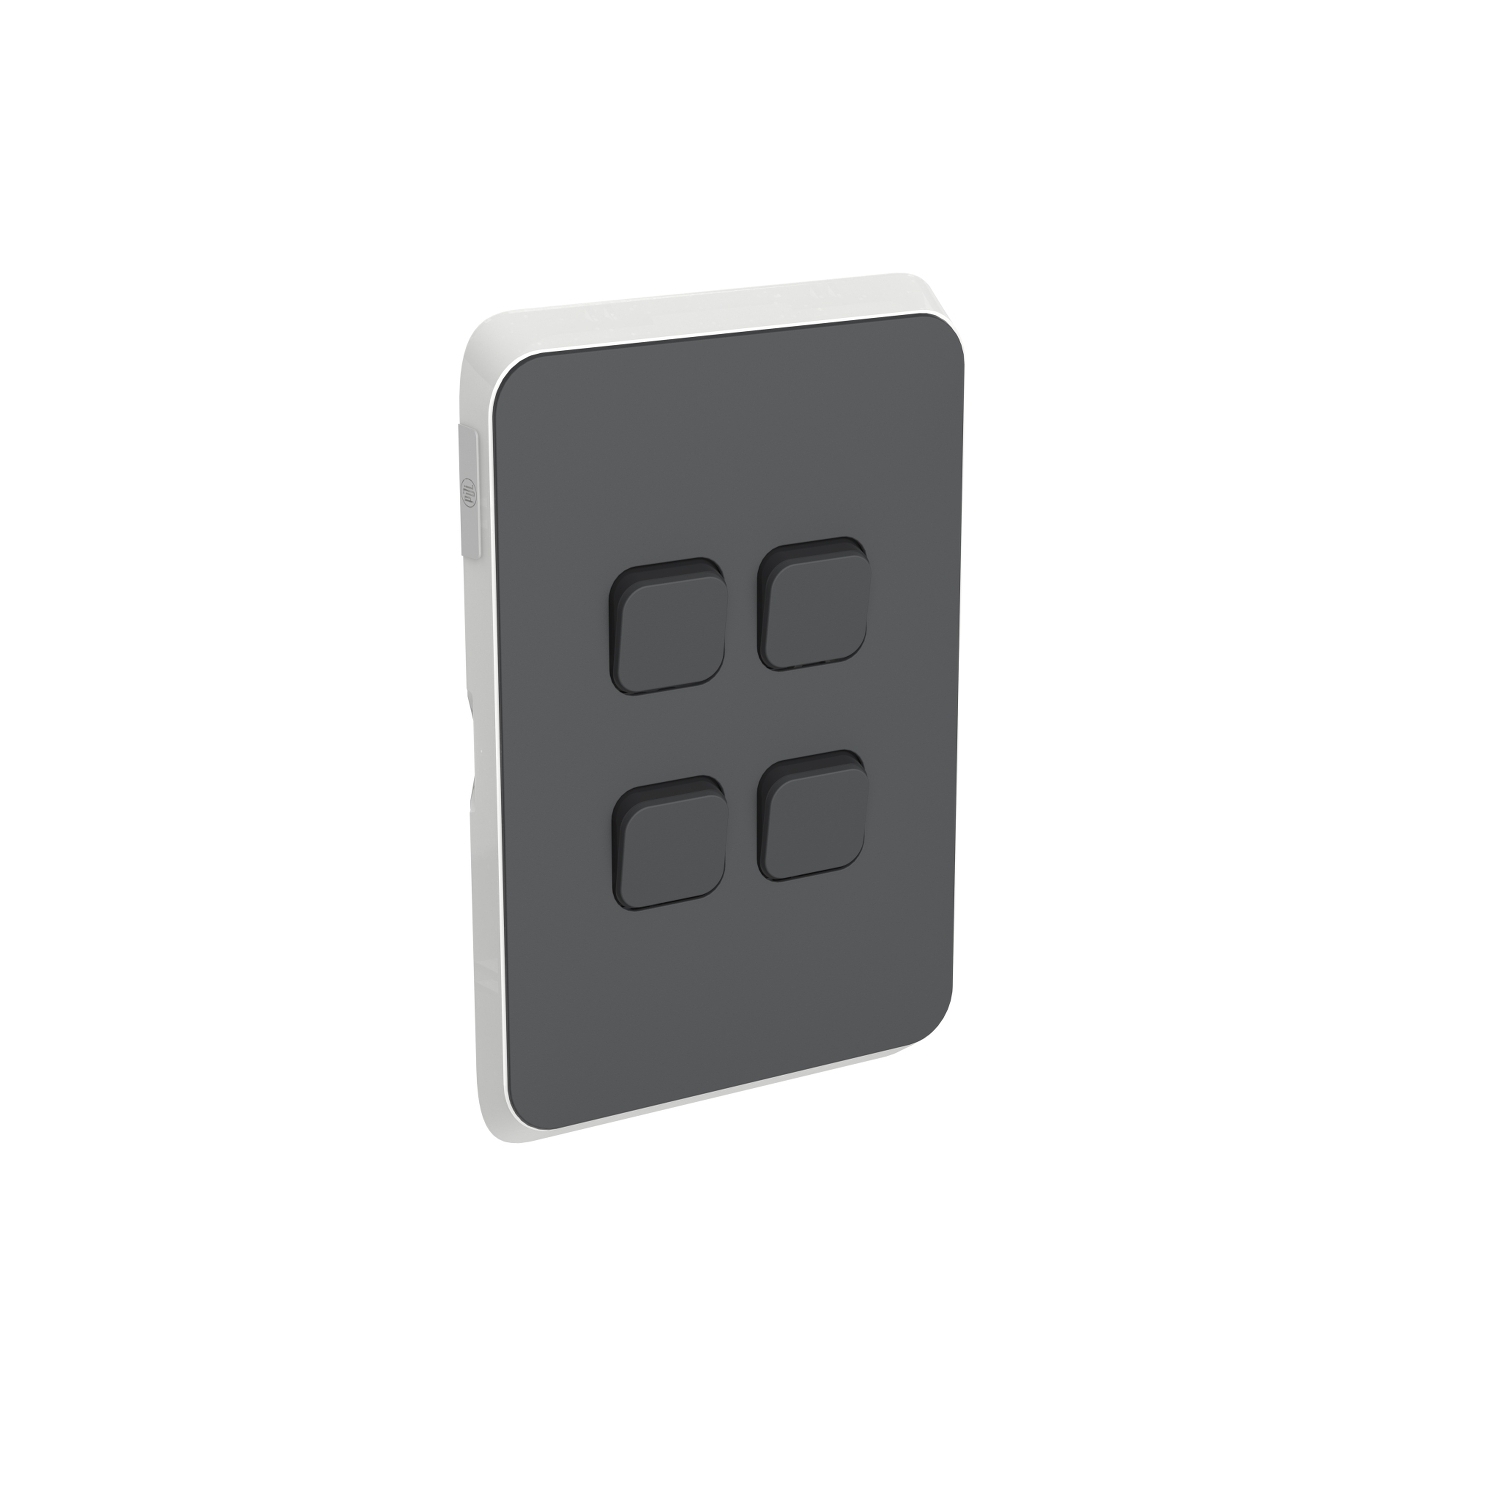 PDL384C-AN - PDL Iconic Cover Plate Switch 4Gang - Anthracite